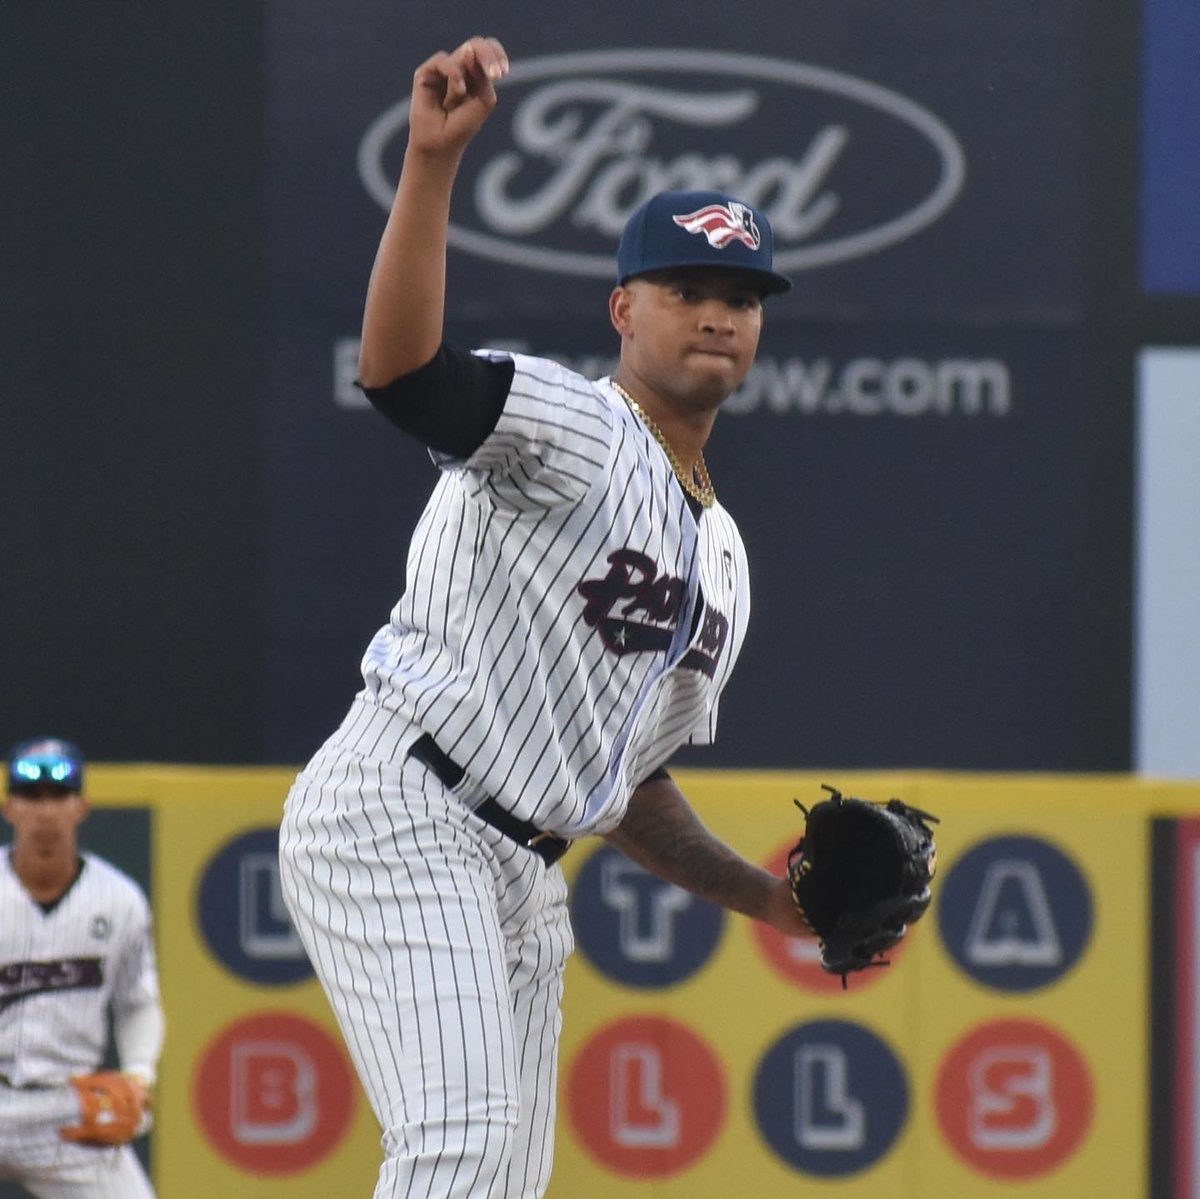 New York Yankees: Takeaways from a new Yankee pitching star